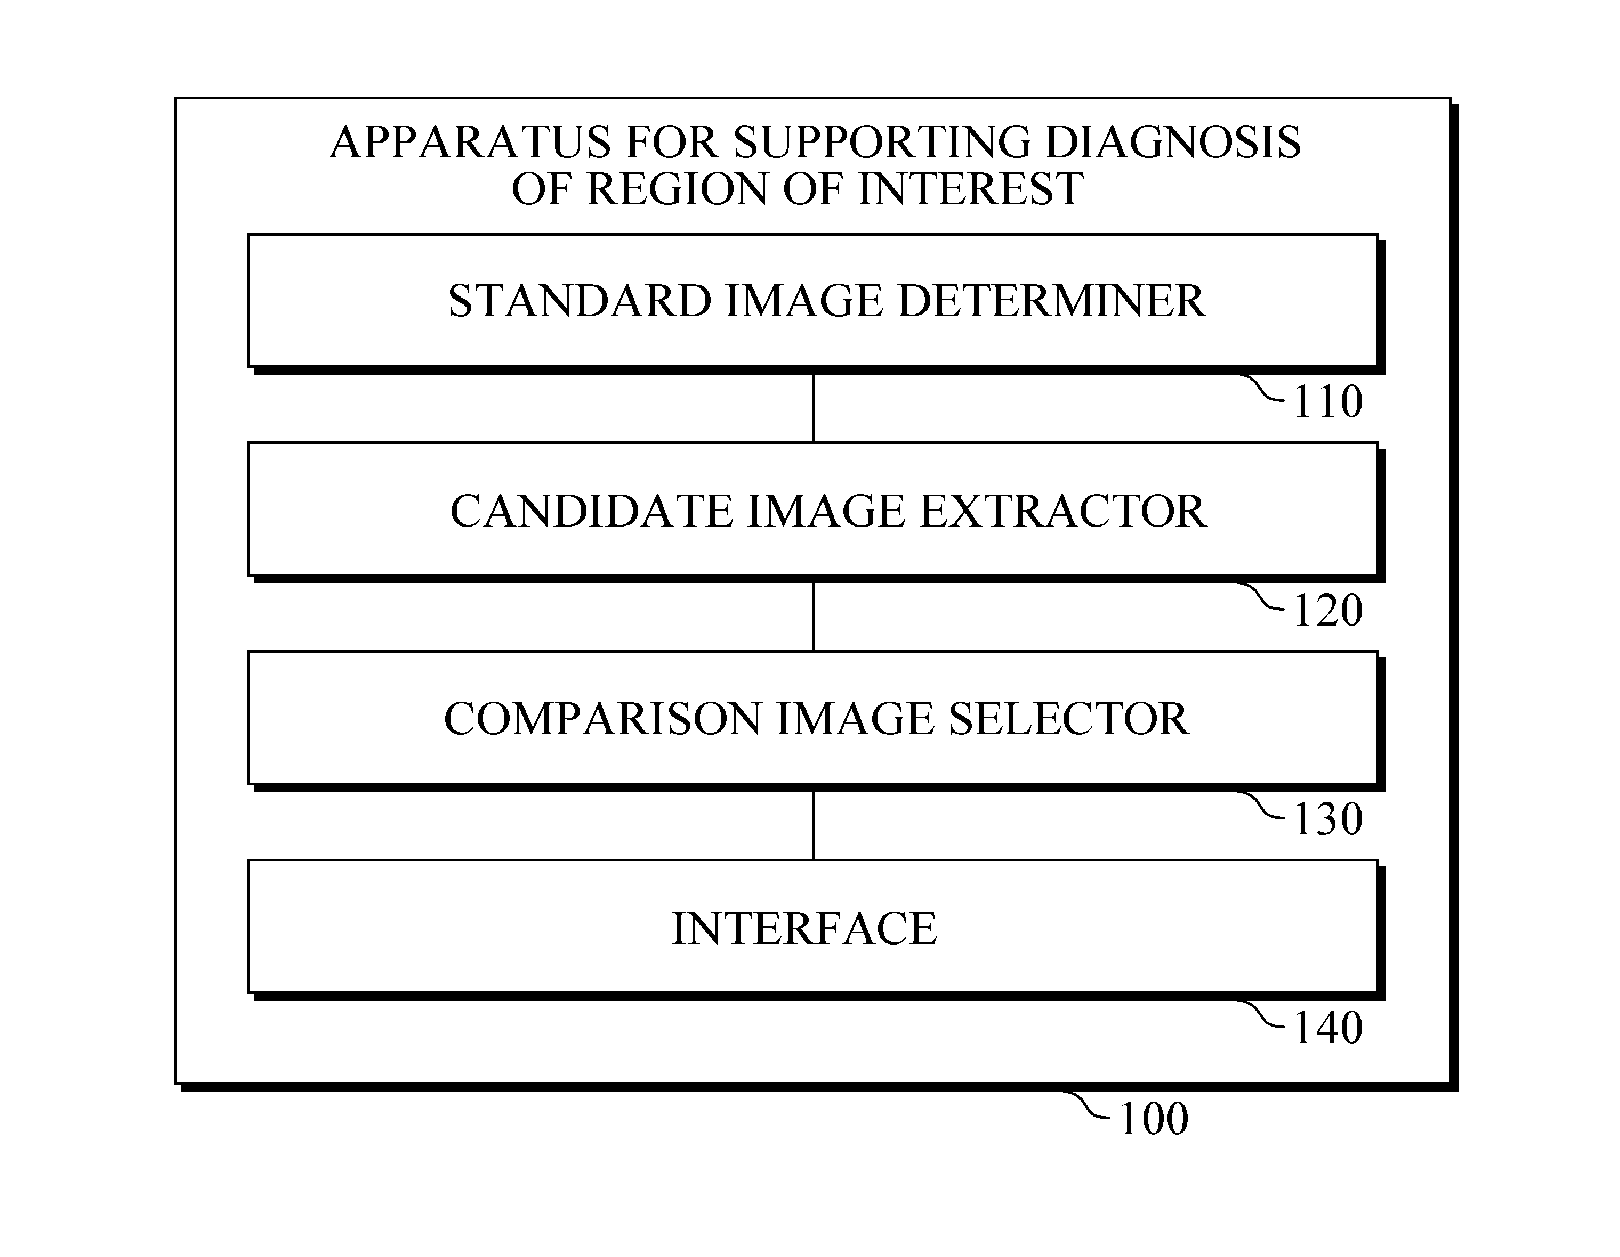 Method and apparatus for supporting diagnosis of region of interest by providing comparison image